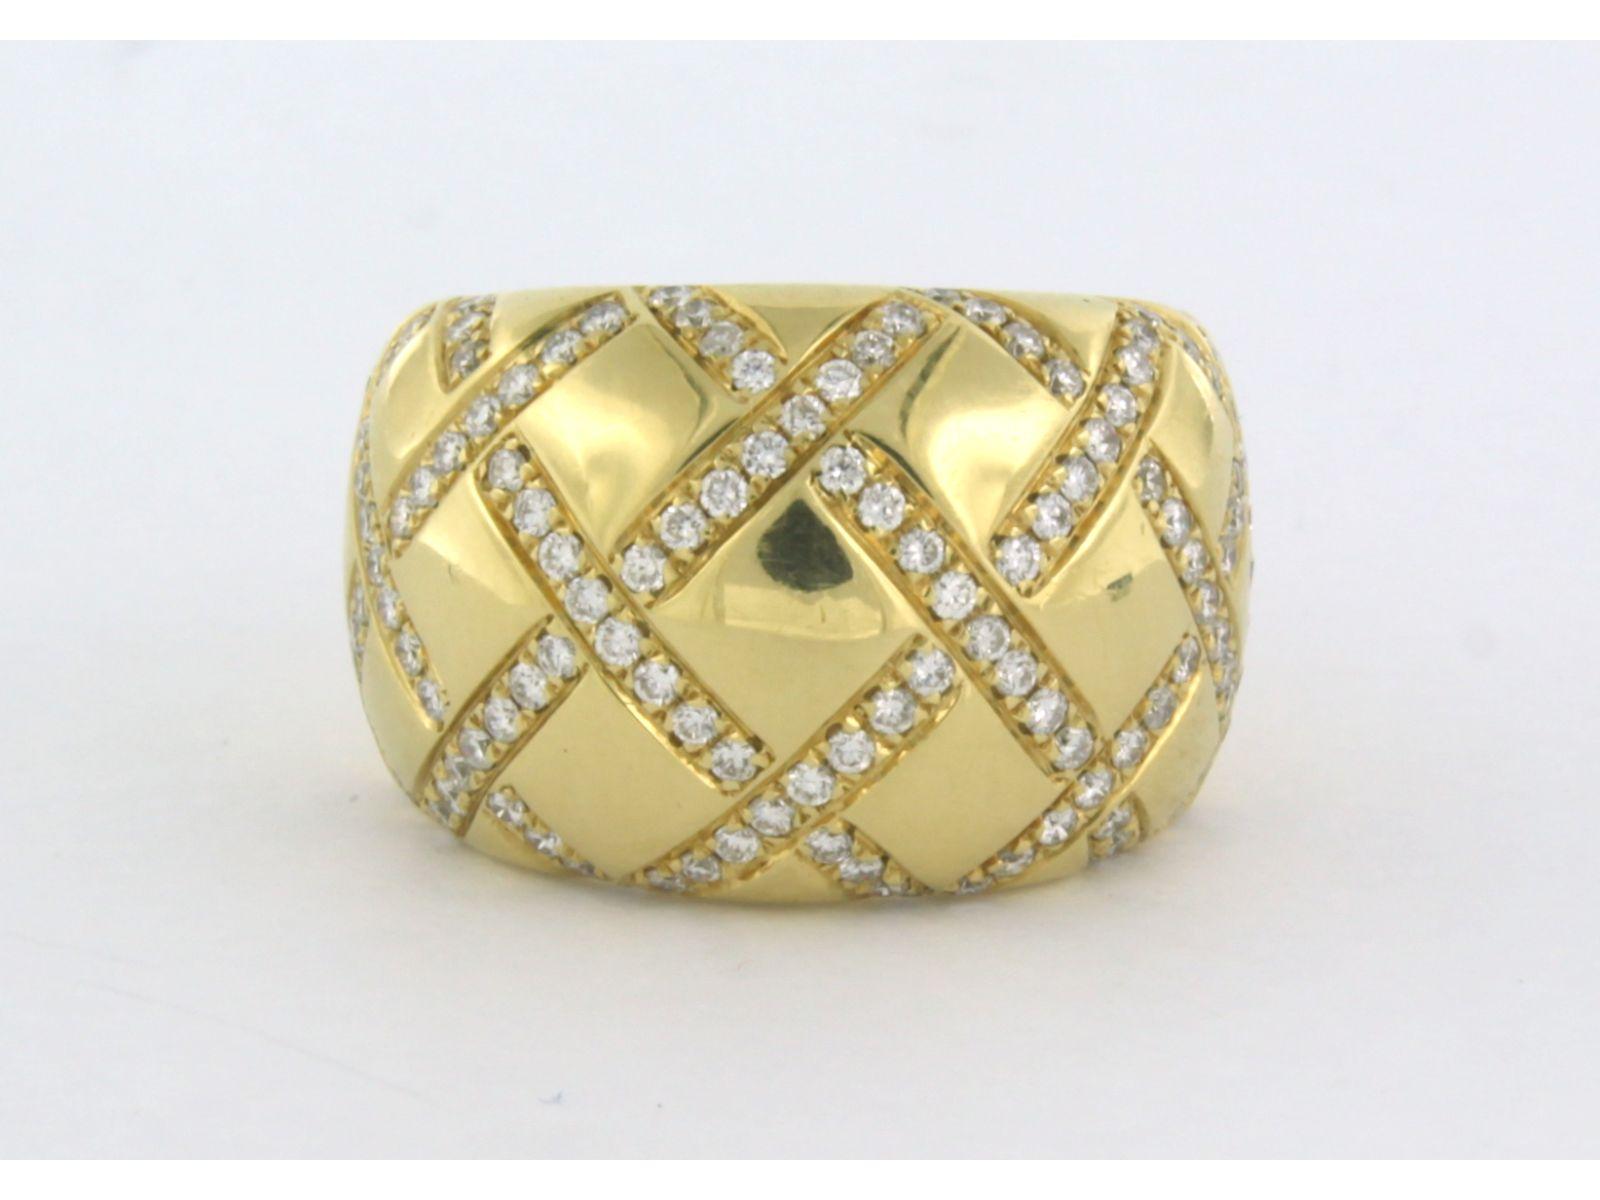 Wempe 18k yellow gold ring set with brilliant cut diamonds up to . 1.38ct - F - VS - ring size U.S. 6.5 - EU. 17(53)

detailed description:

the top of the ring is 1.5 cm wide

ring size U.S. 6.5 - EU. 17(53), ring can be enlarged or reduced a few